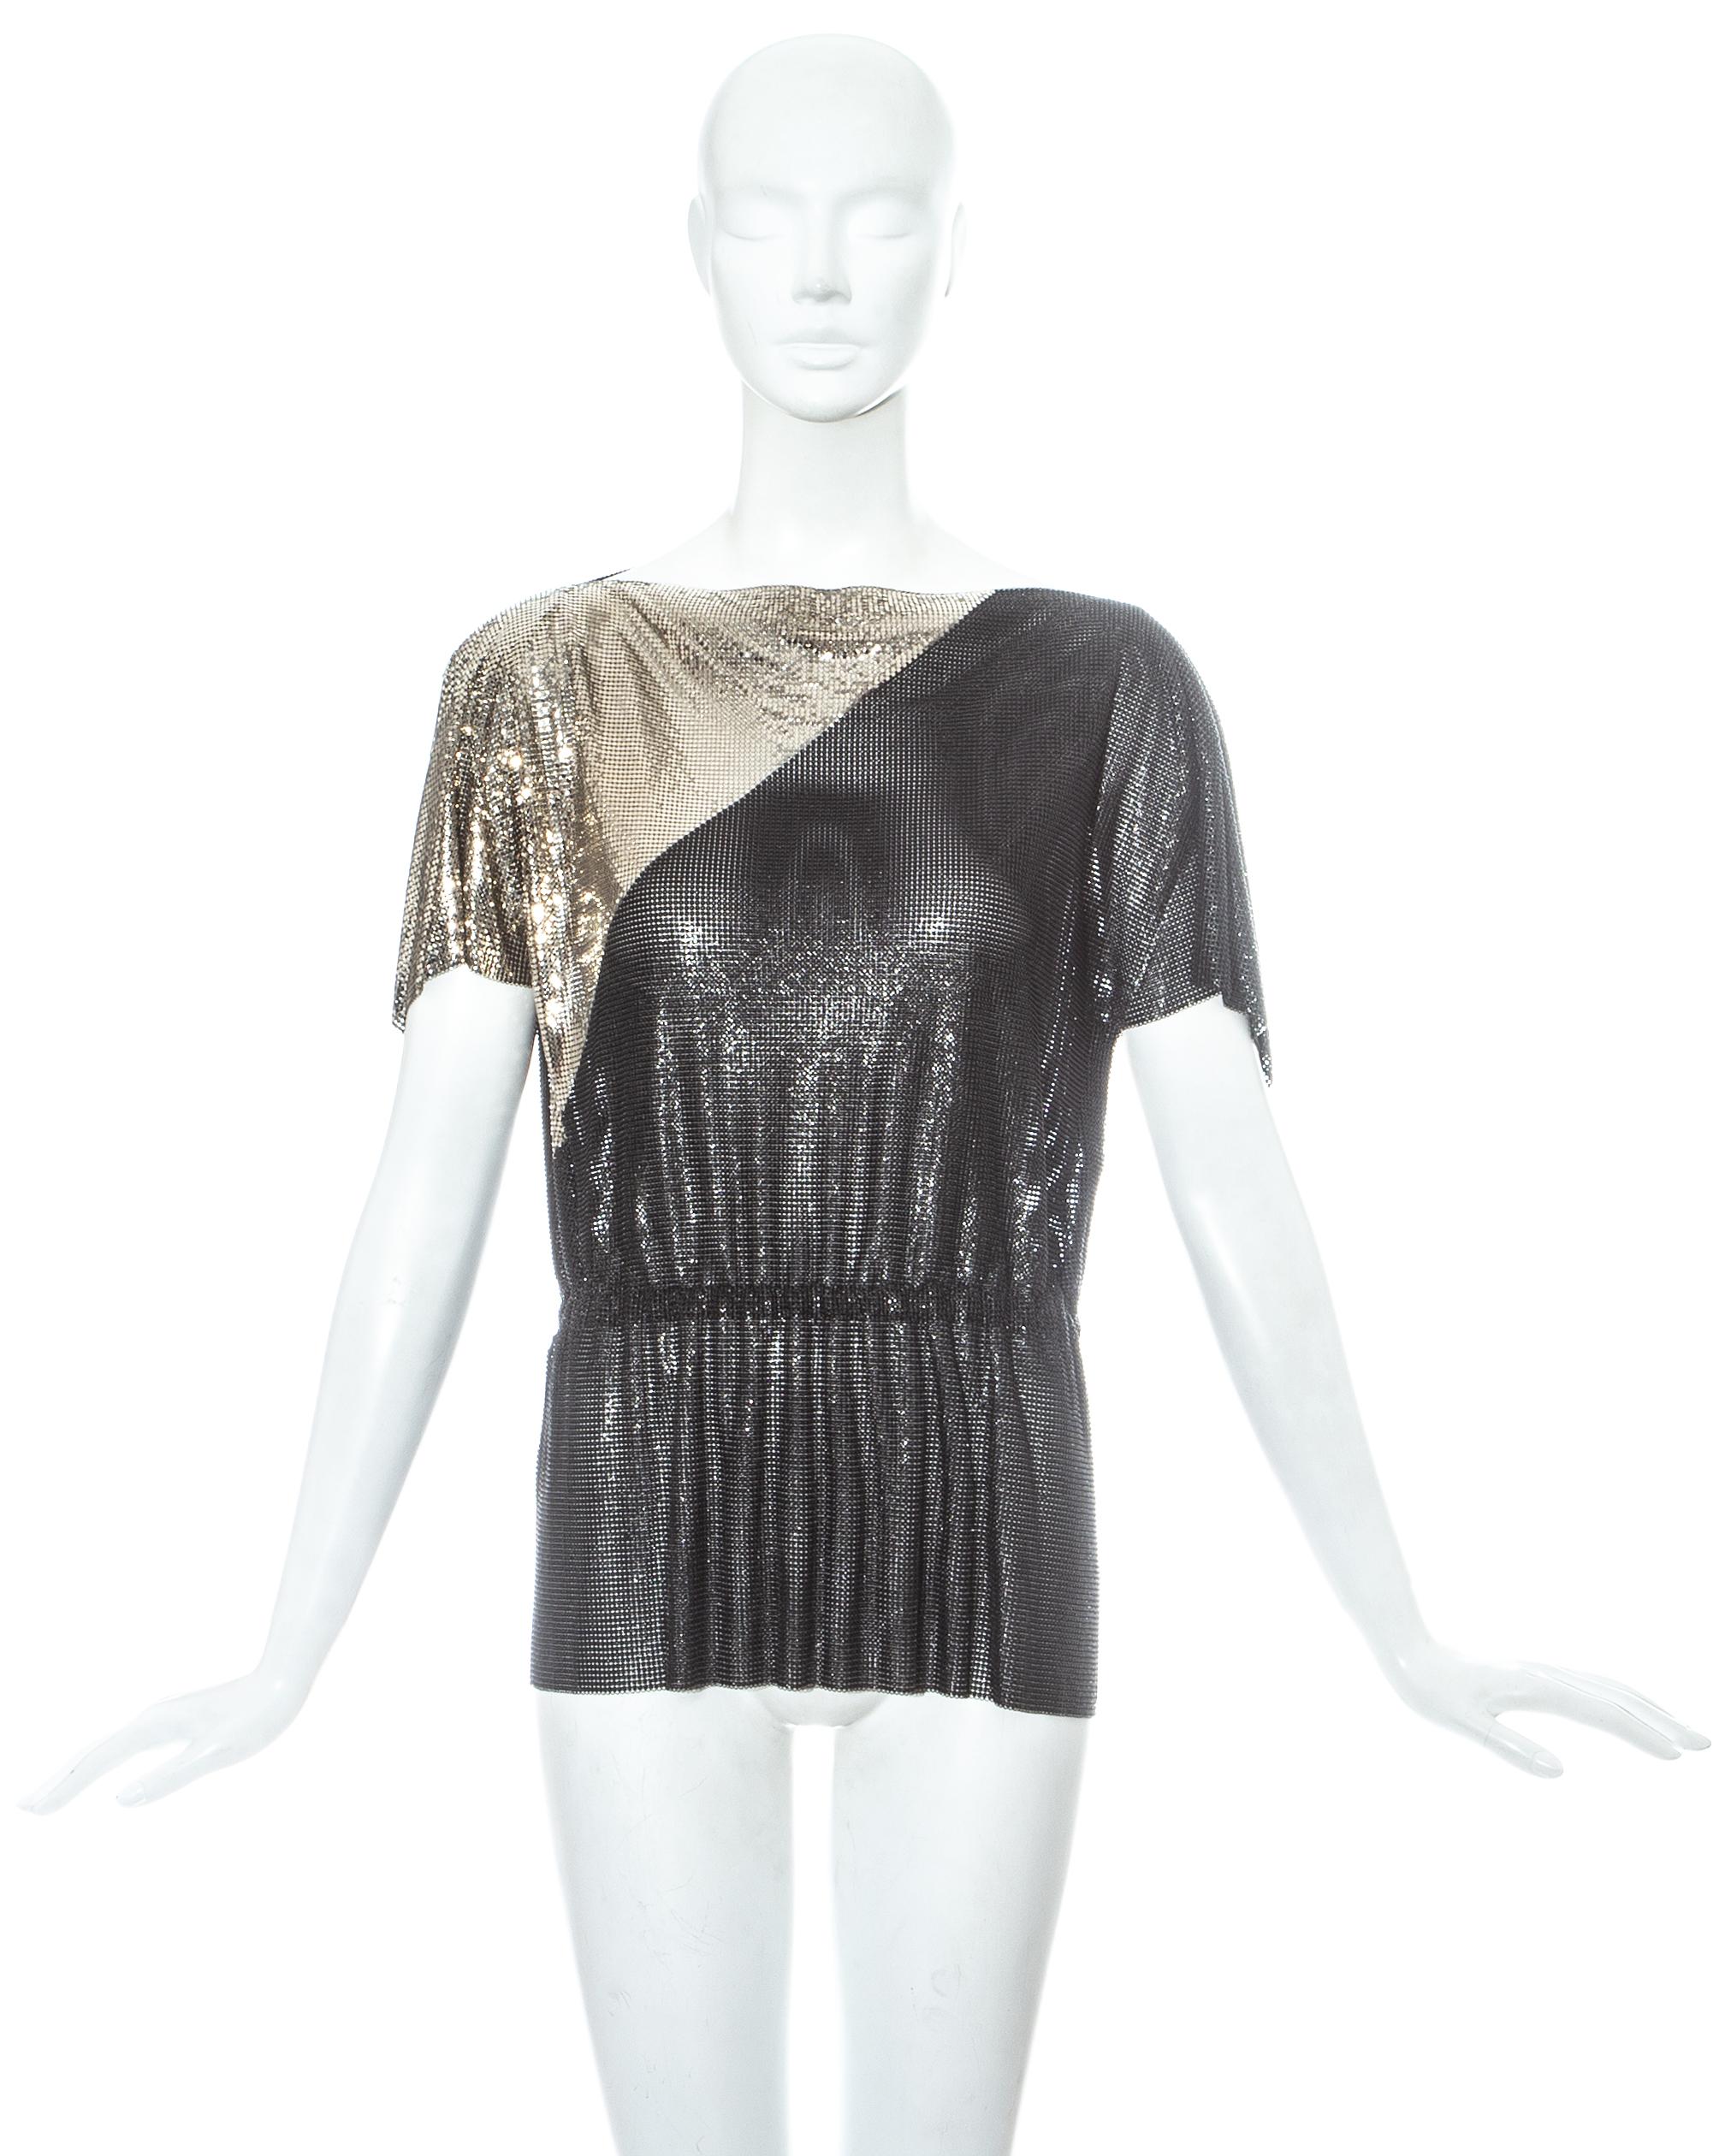 Gianni Versace silver and grey proton chainmail metal mesh top with draped sleeves and elasticated waistband.

Fall-Winter 1983